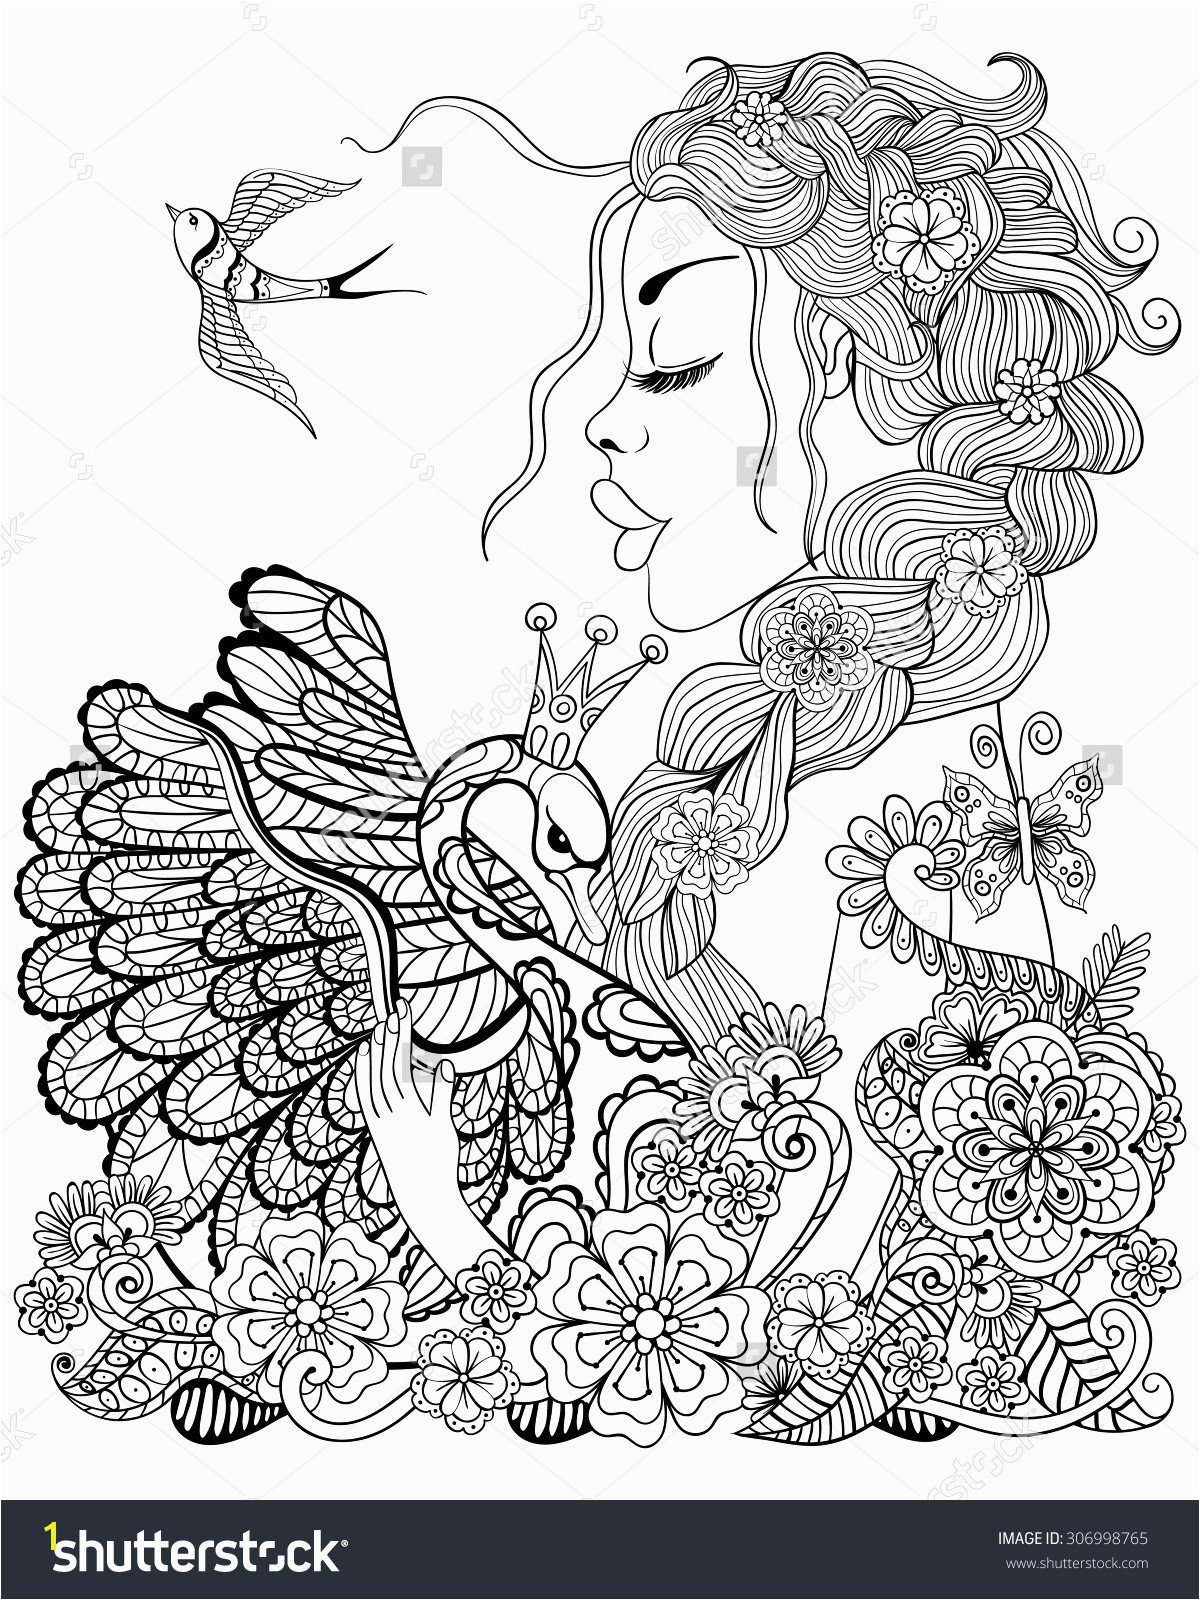 Finished Coloring Pages for Adults Adult Coloring Pages Finished Best Adult Coloring Page Best S S